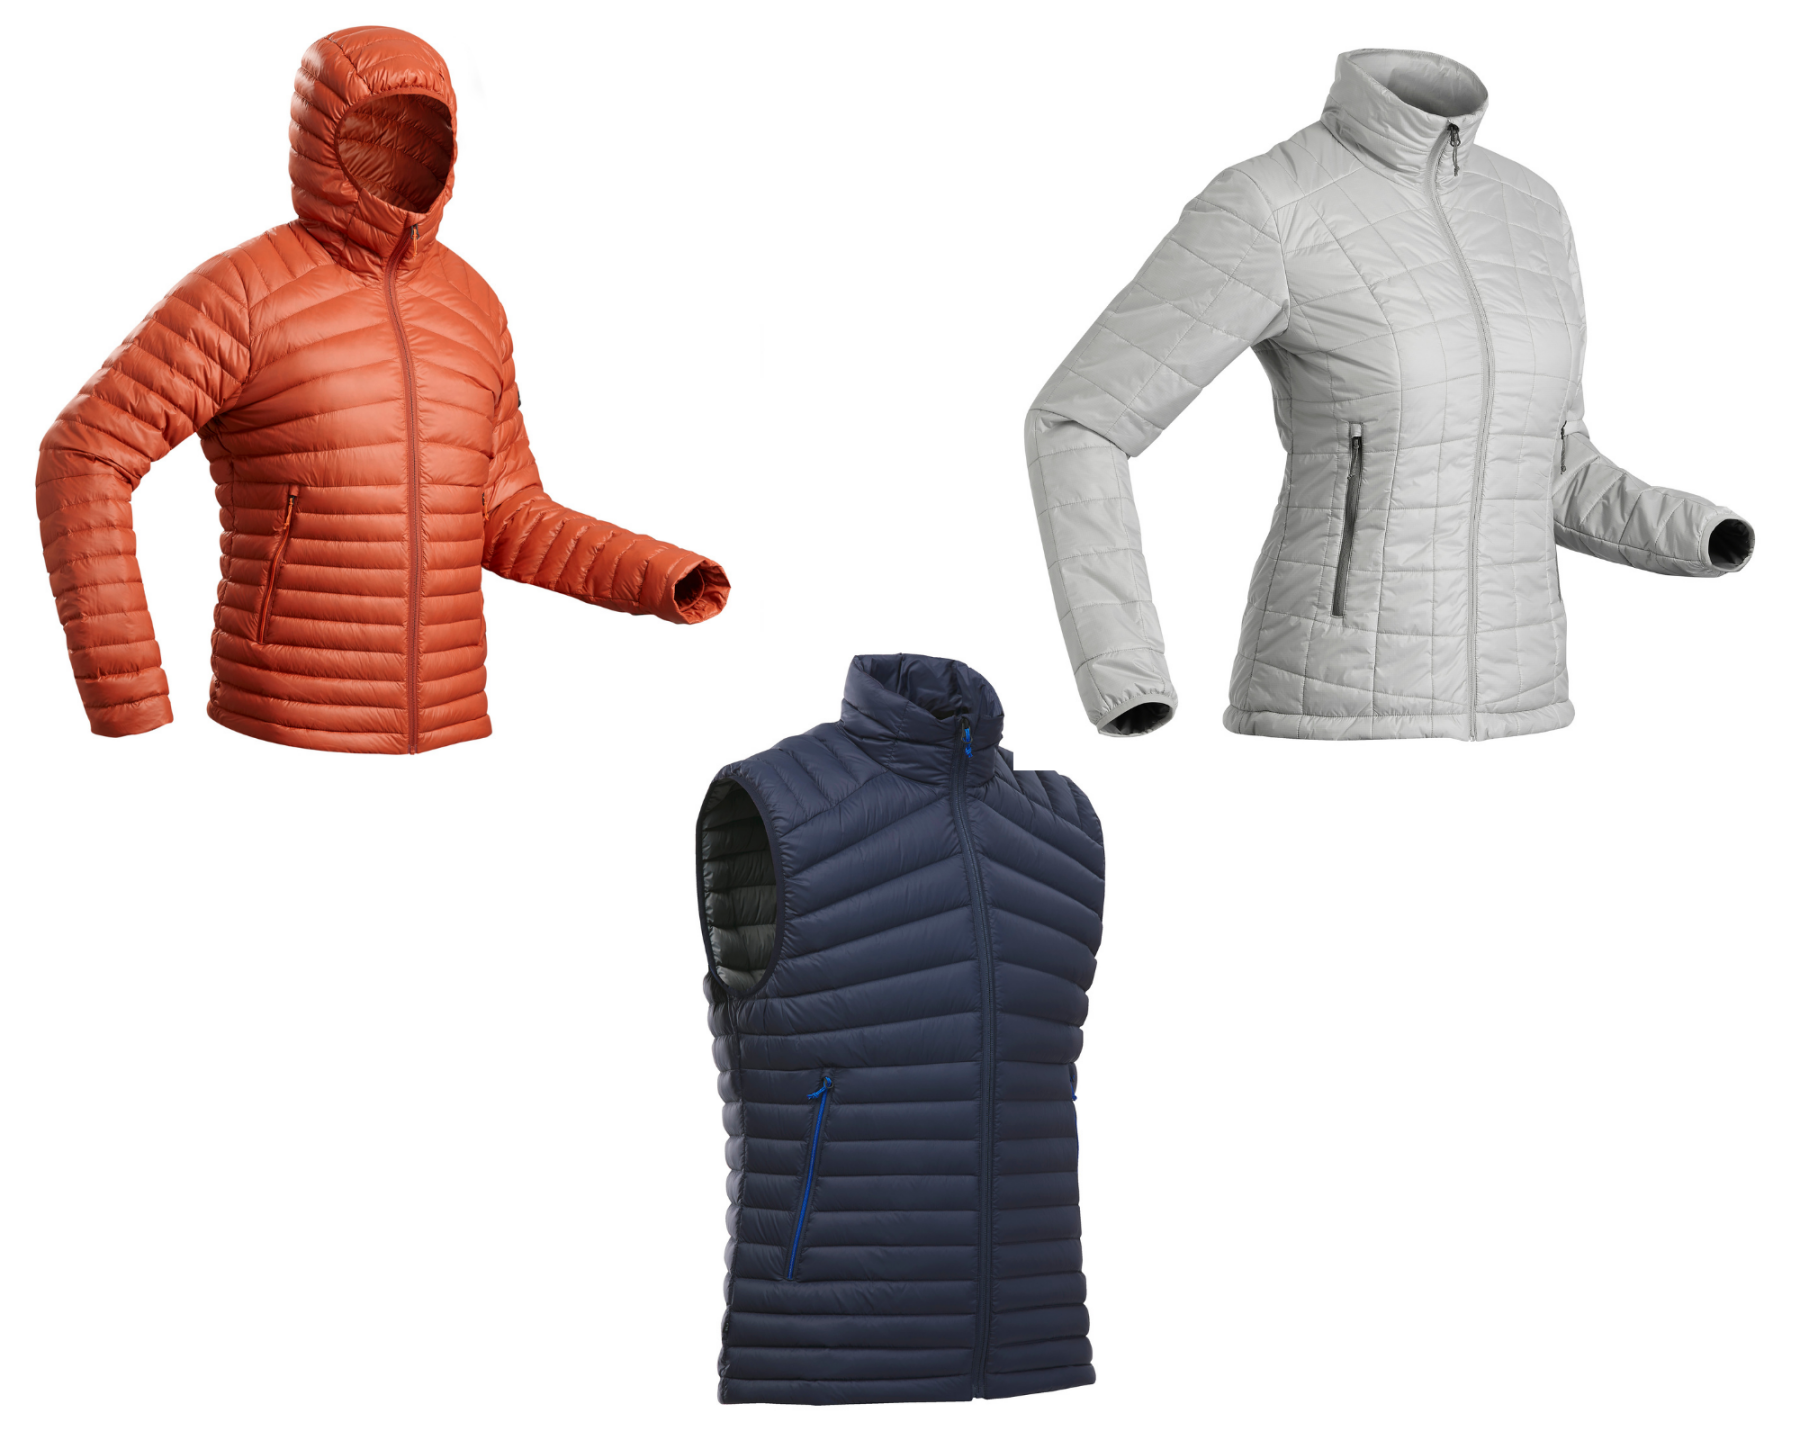 Padded jackets with or without hoods, with or without sleeves